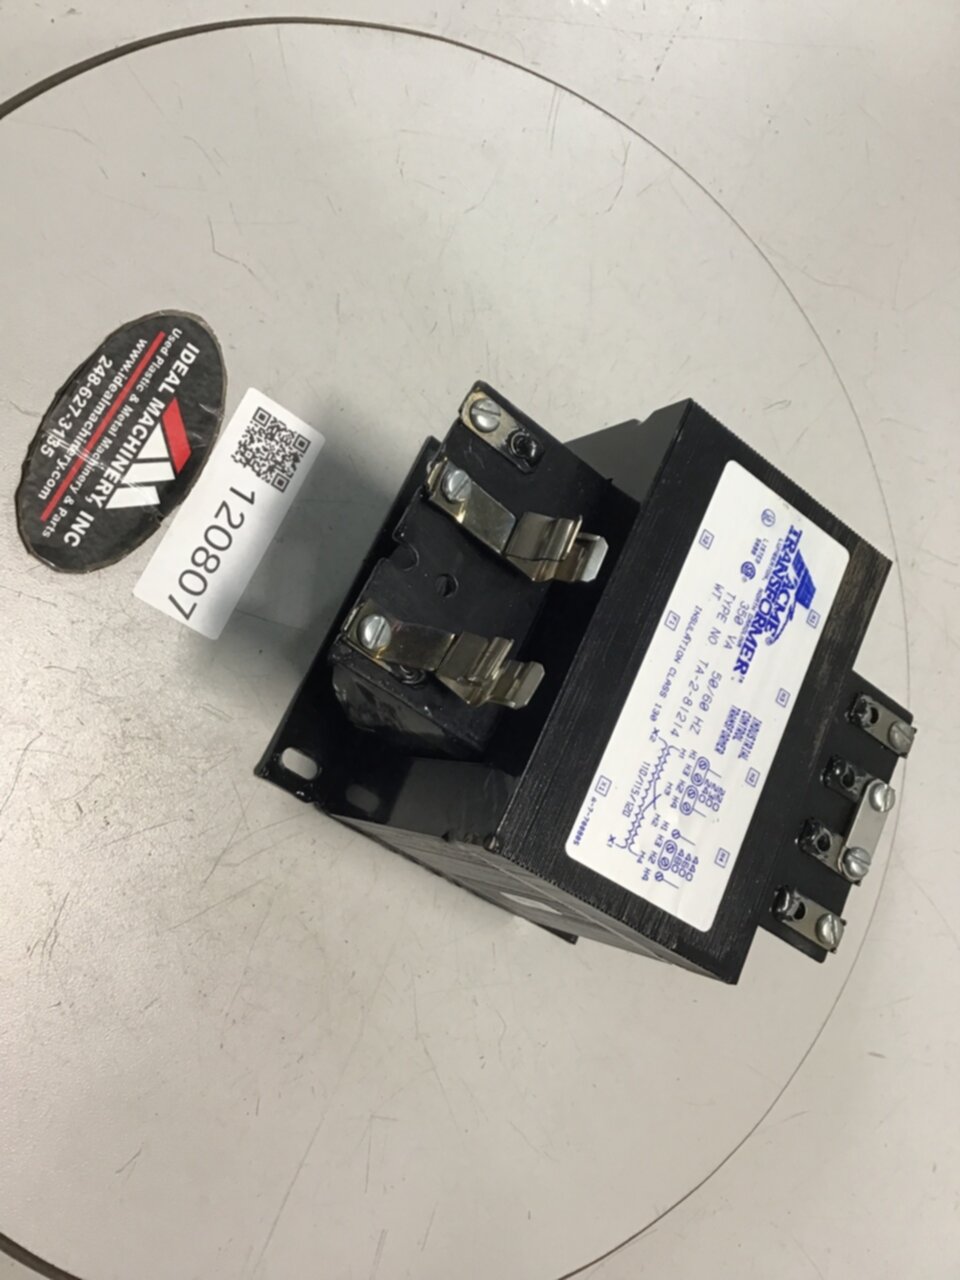 Acme Electric Control Transformer 350 Model Ta-2-81214 for sale online 